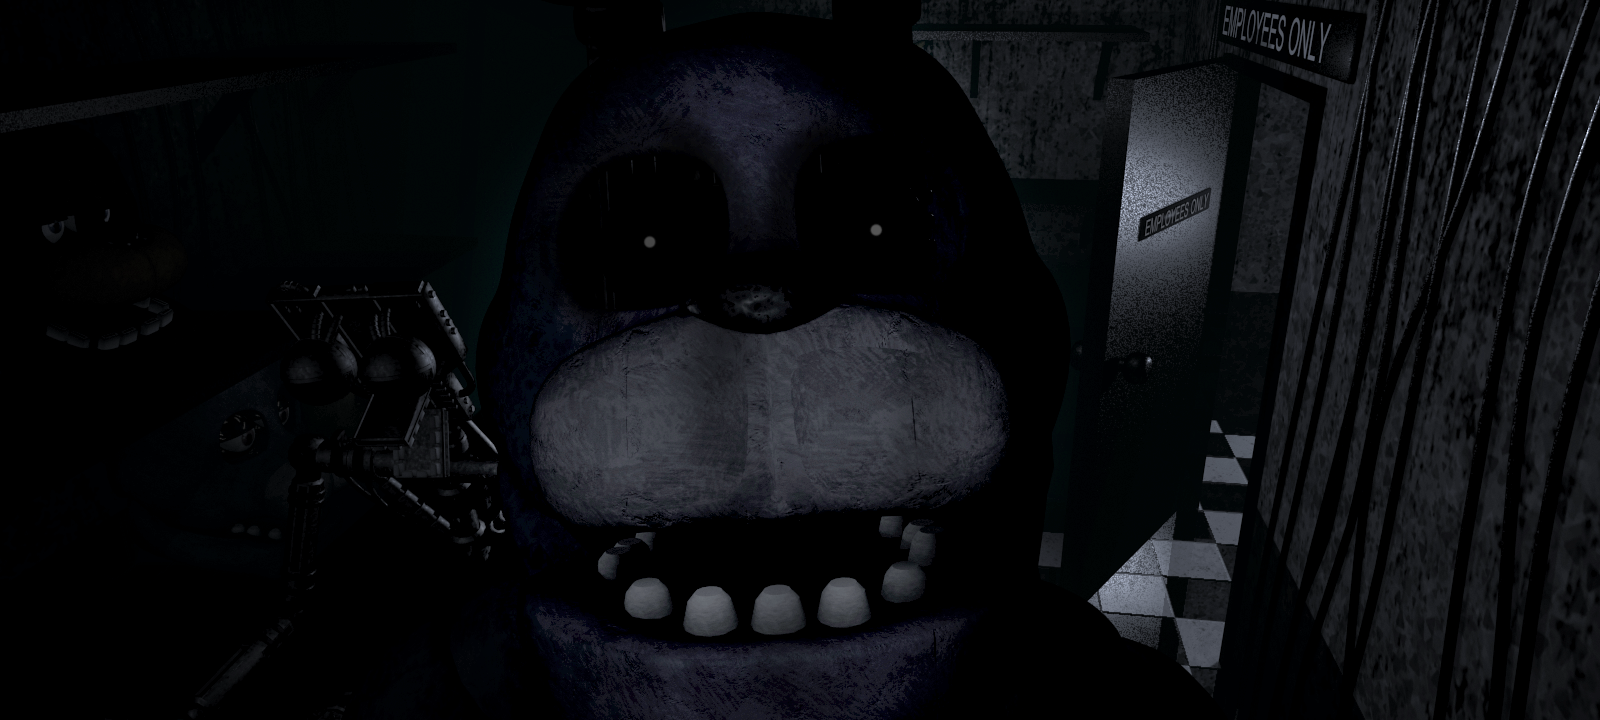 Free download creepy Five Nights at Freddys Photo 37637542 [1600x720] for your Desktop, Mobile & Tablet. Explore Scary FNAF Wallpaper. FNAF Nightmare Wallpaper, FNAF 1 Wallpaper, FNAF 4 Wallpaper